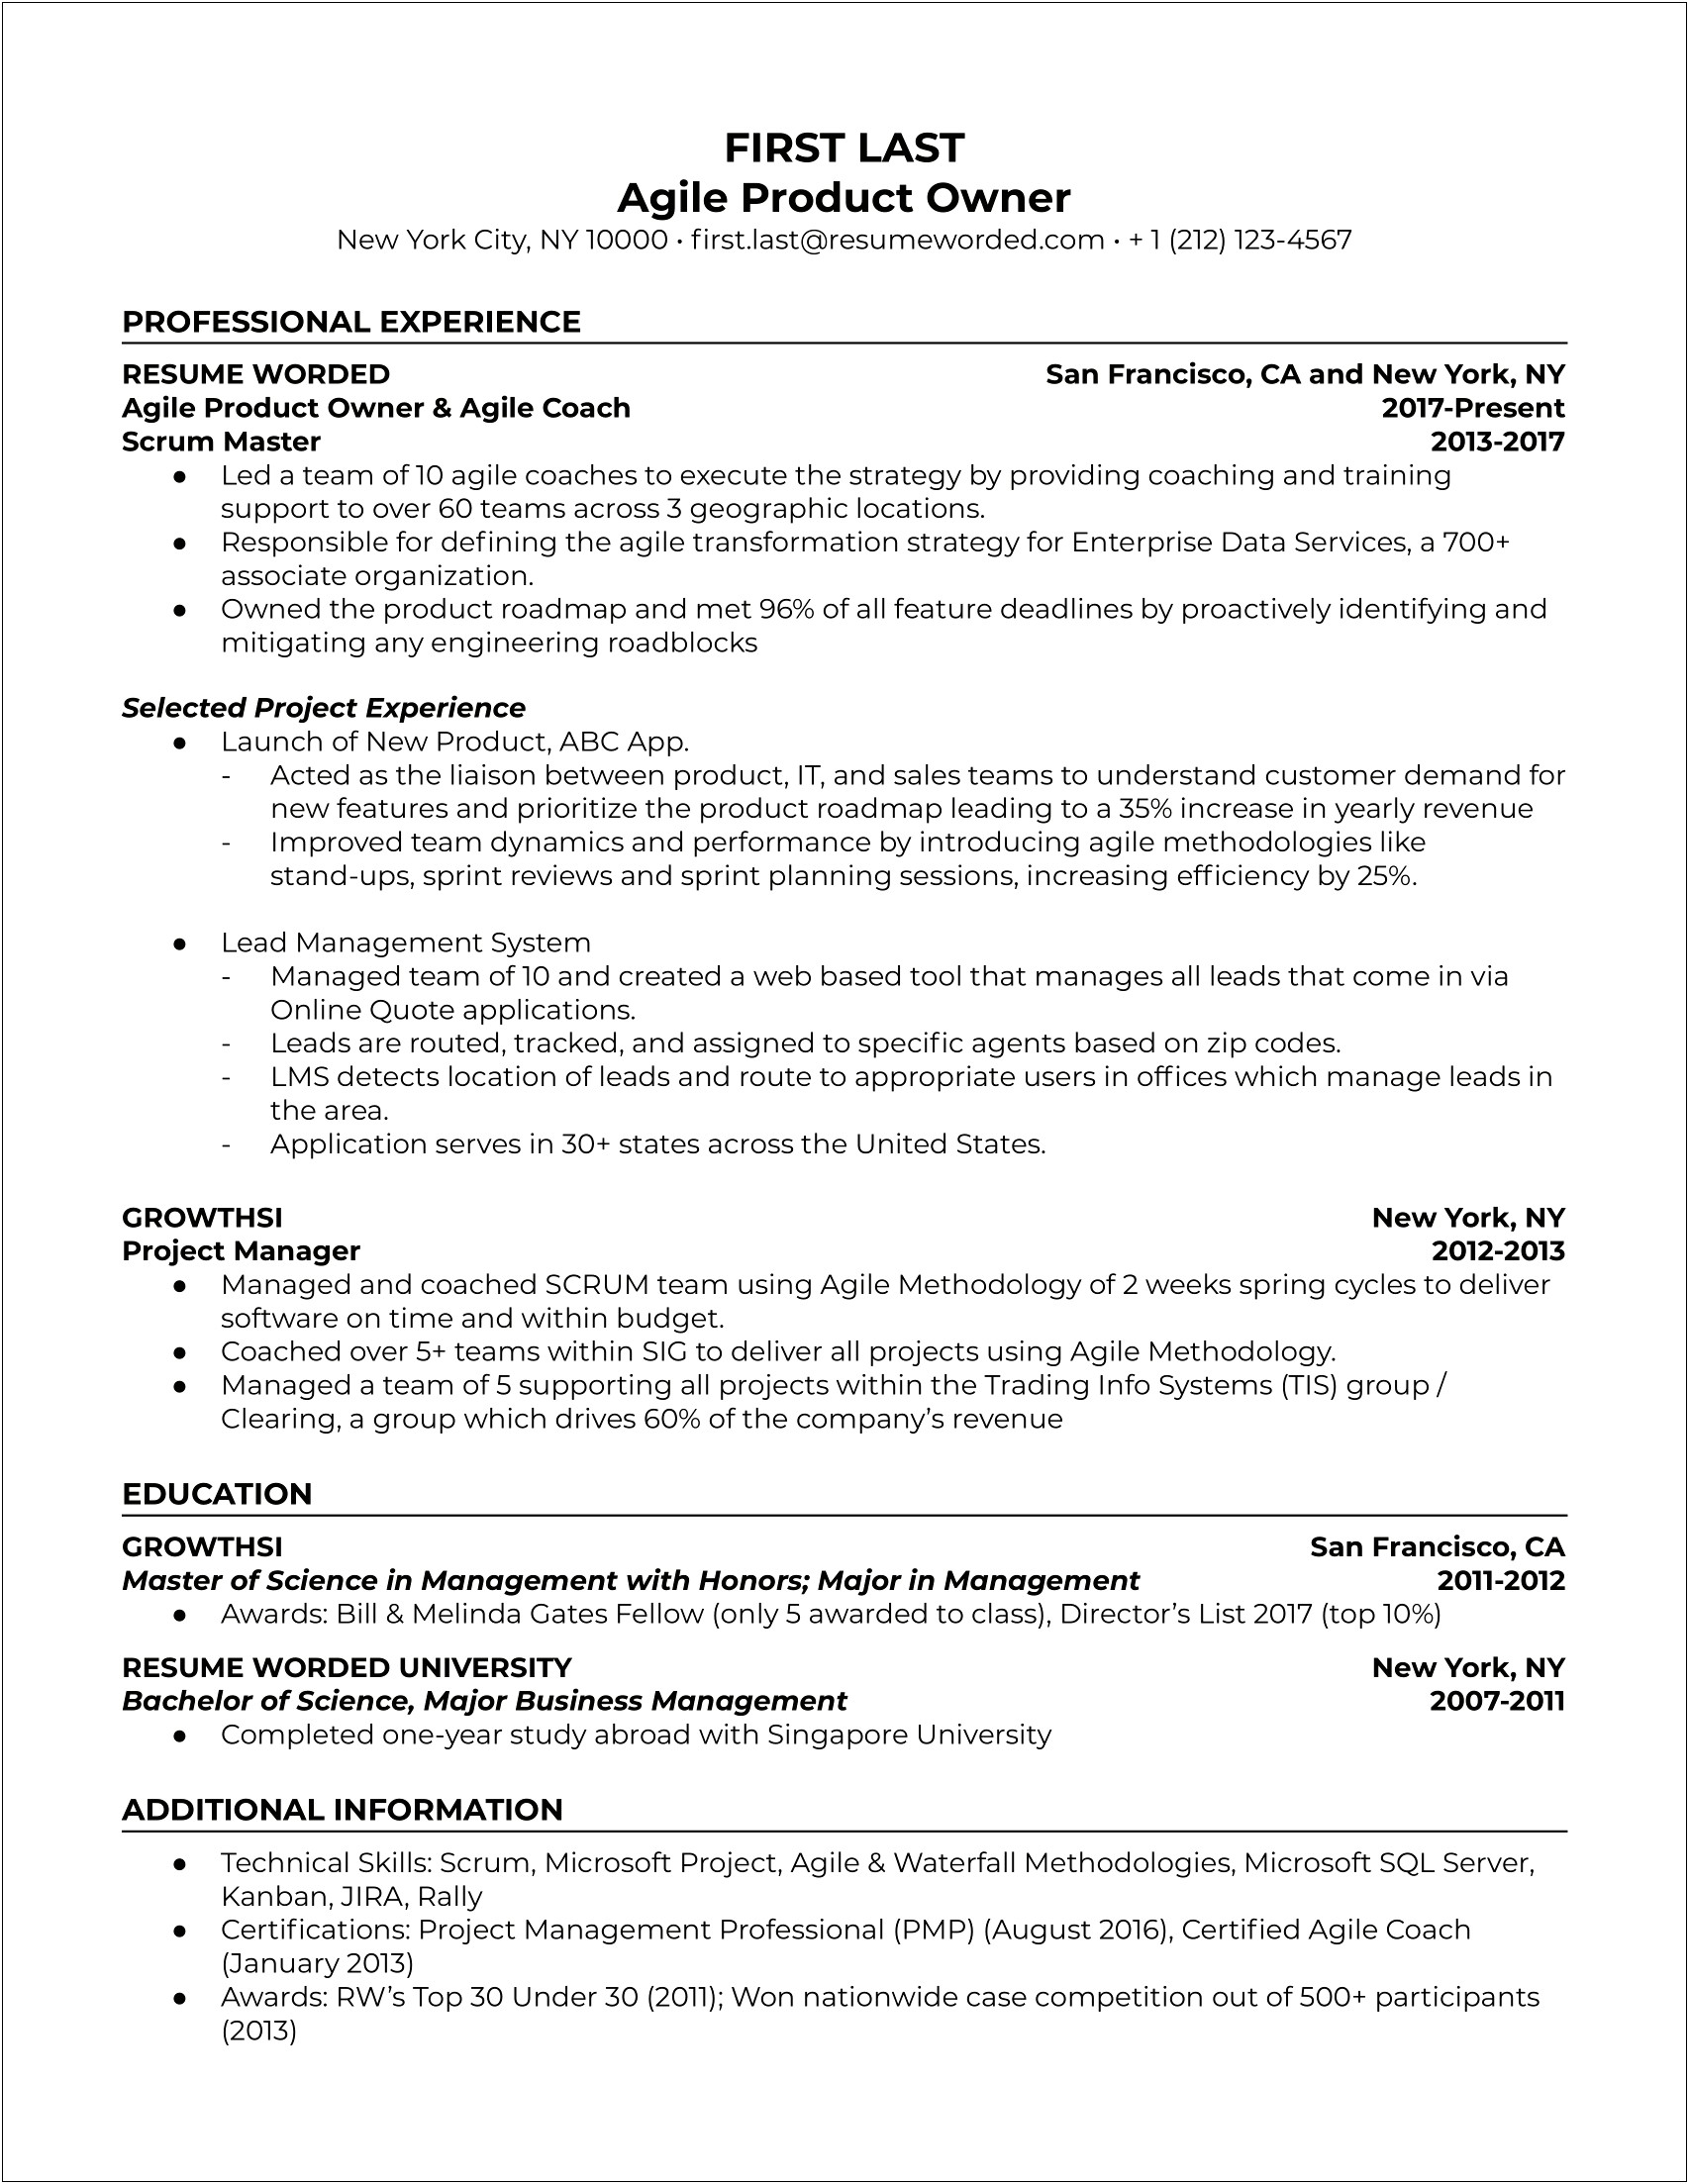 Example Of A Business Owner Resume